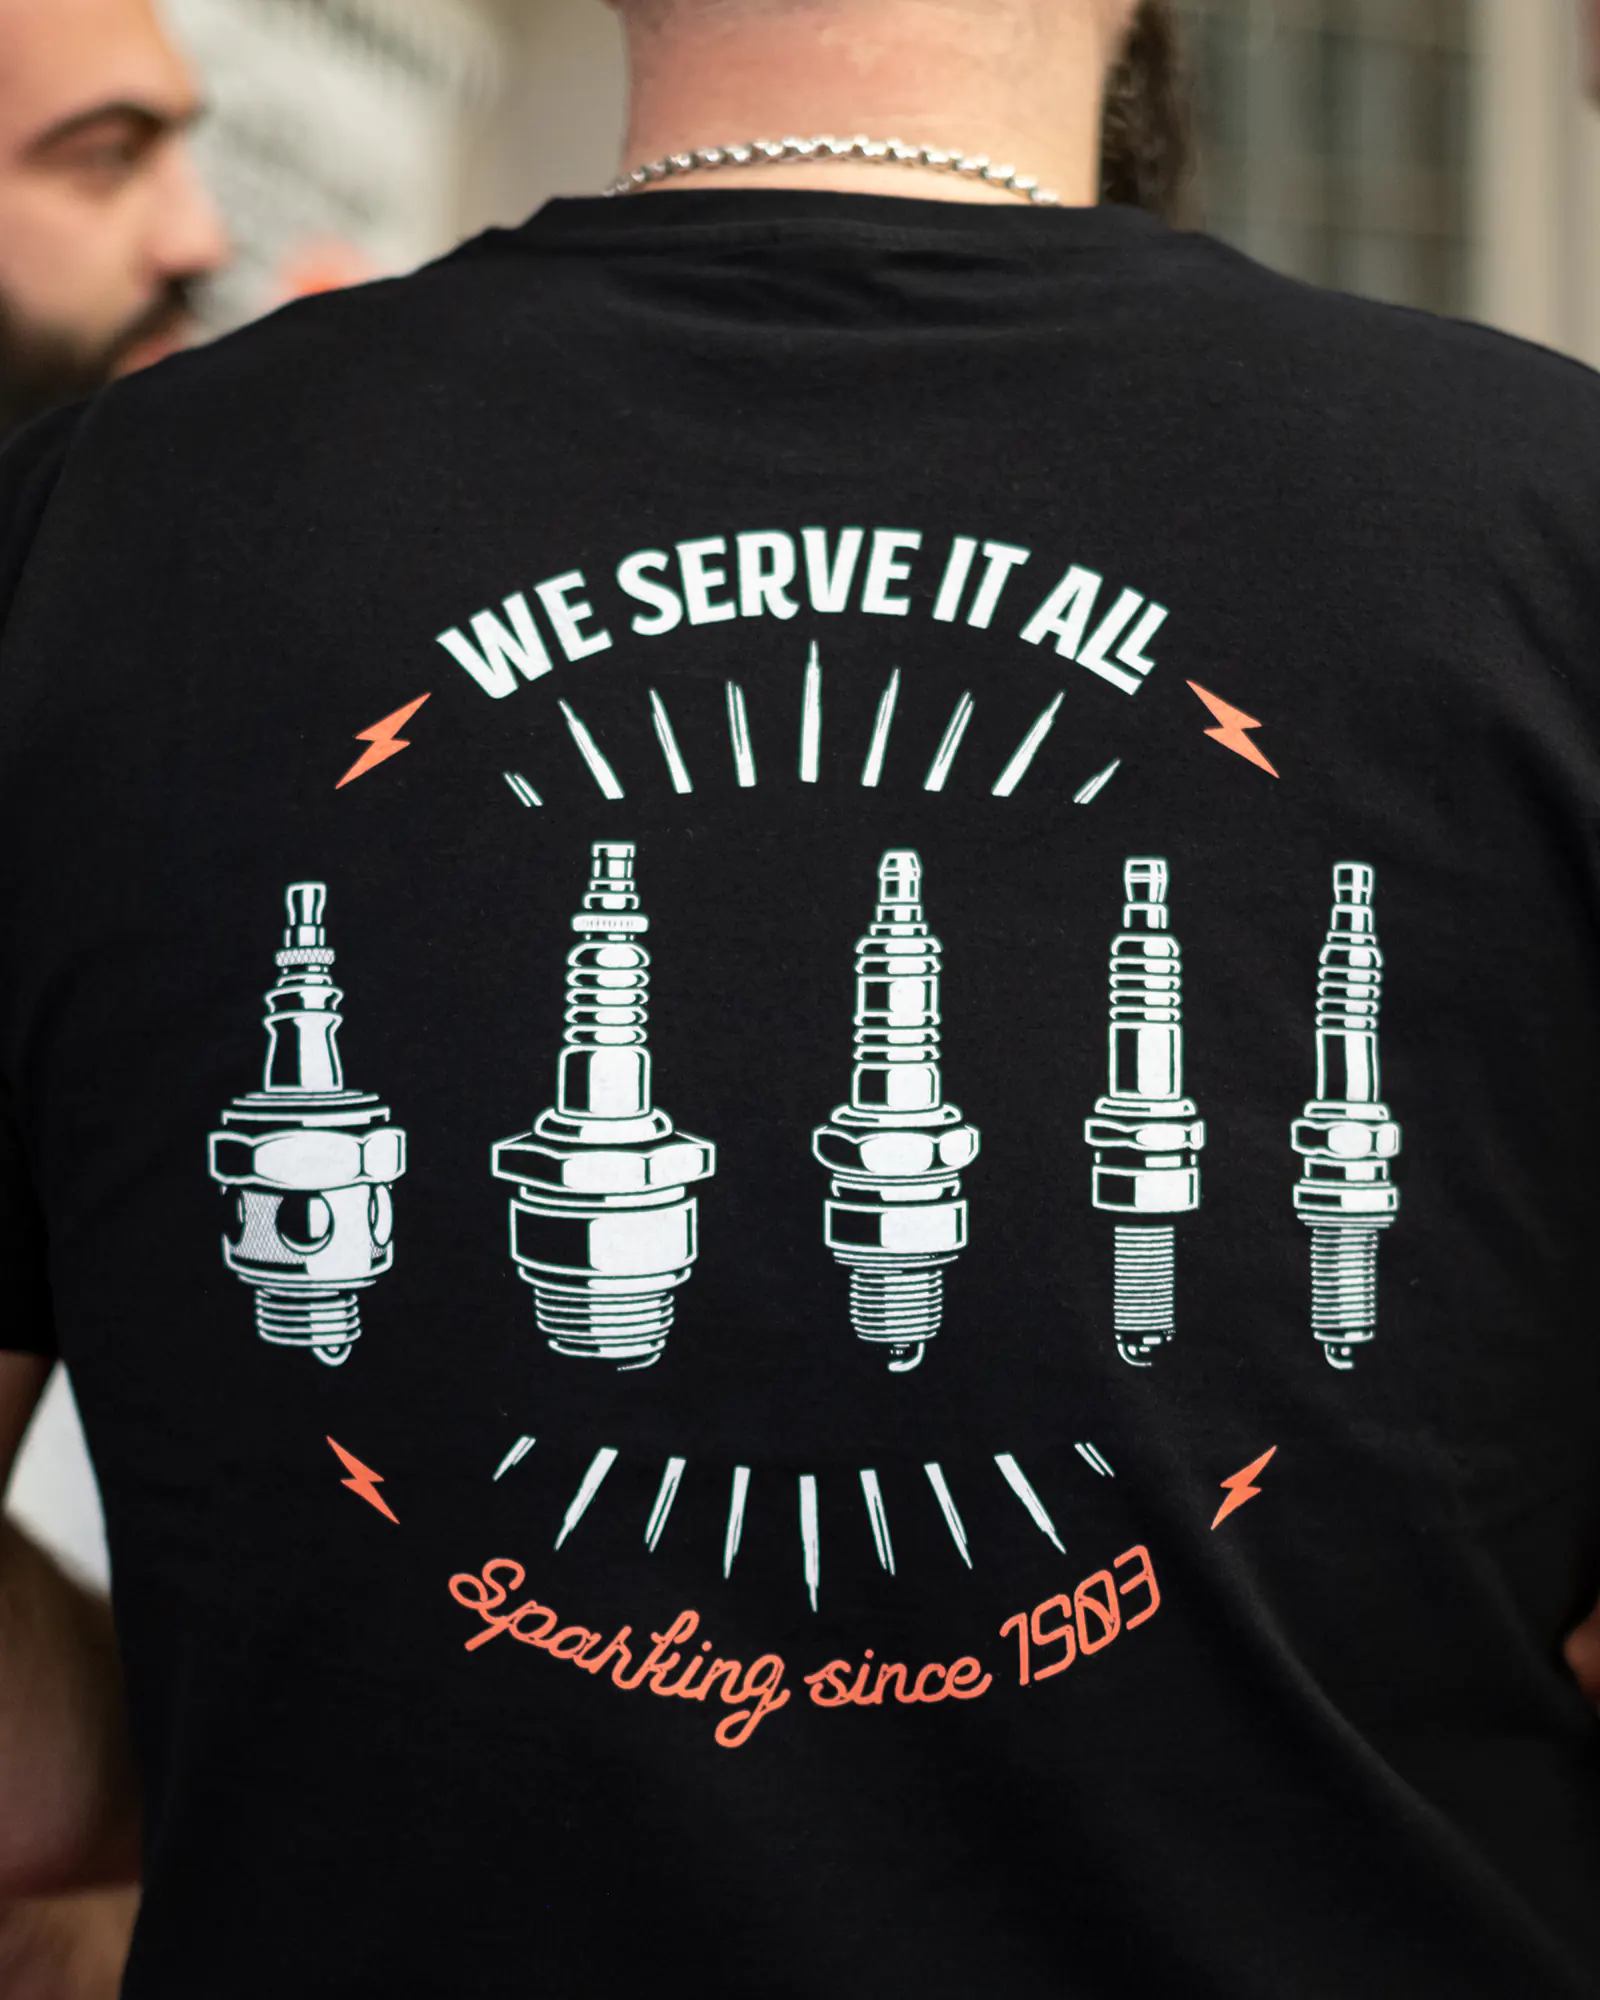 We serve it all - Sparking since 1903